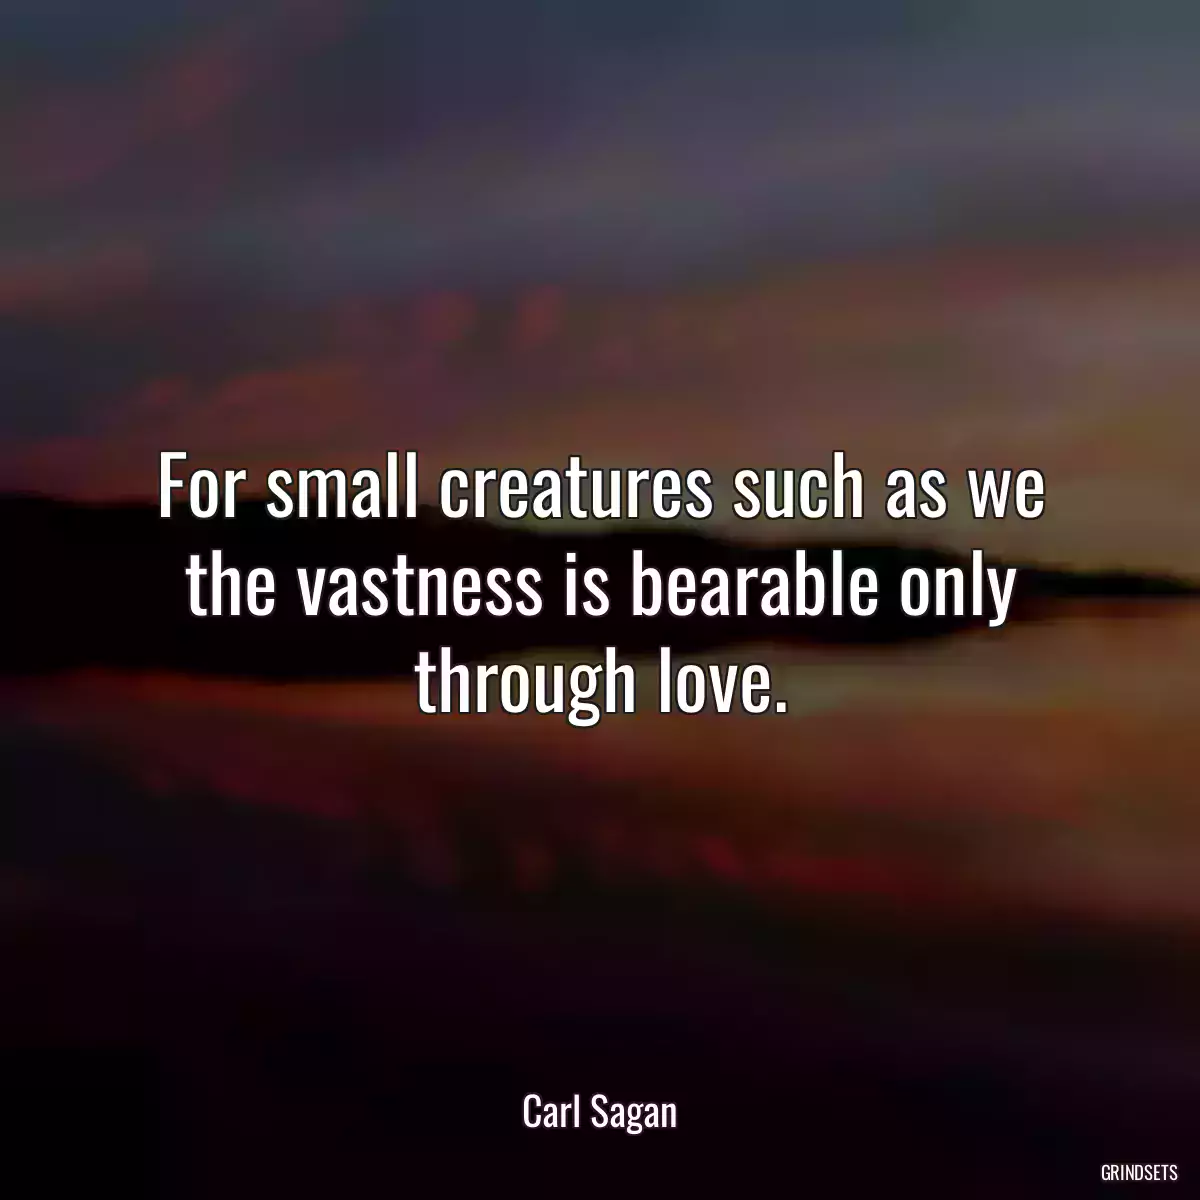 For small creatures such as we the vastness is bearable only through love.